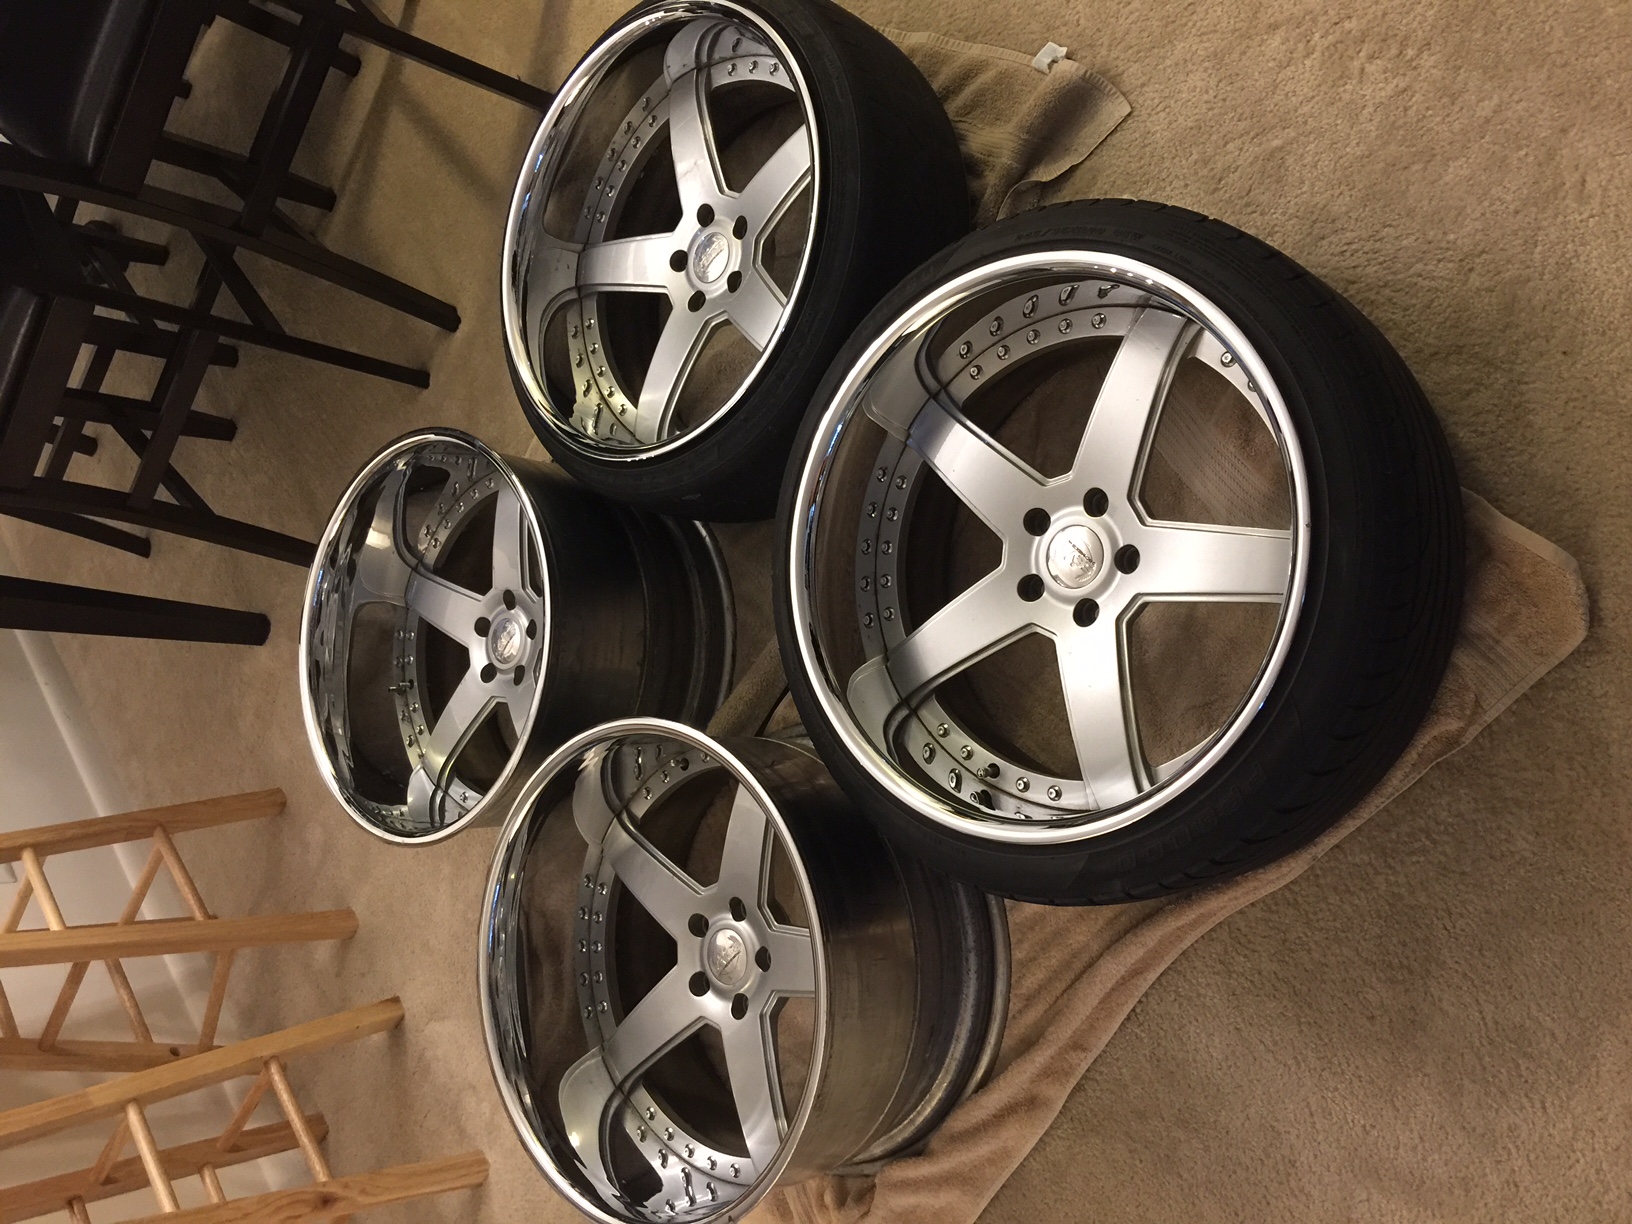 sevas piece r5 20x10 forged 20x12 wheels tires inch my350z g35driver fs forums offers questions text call much please image4